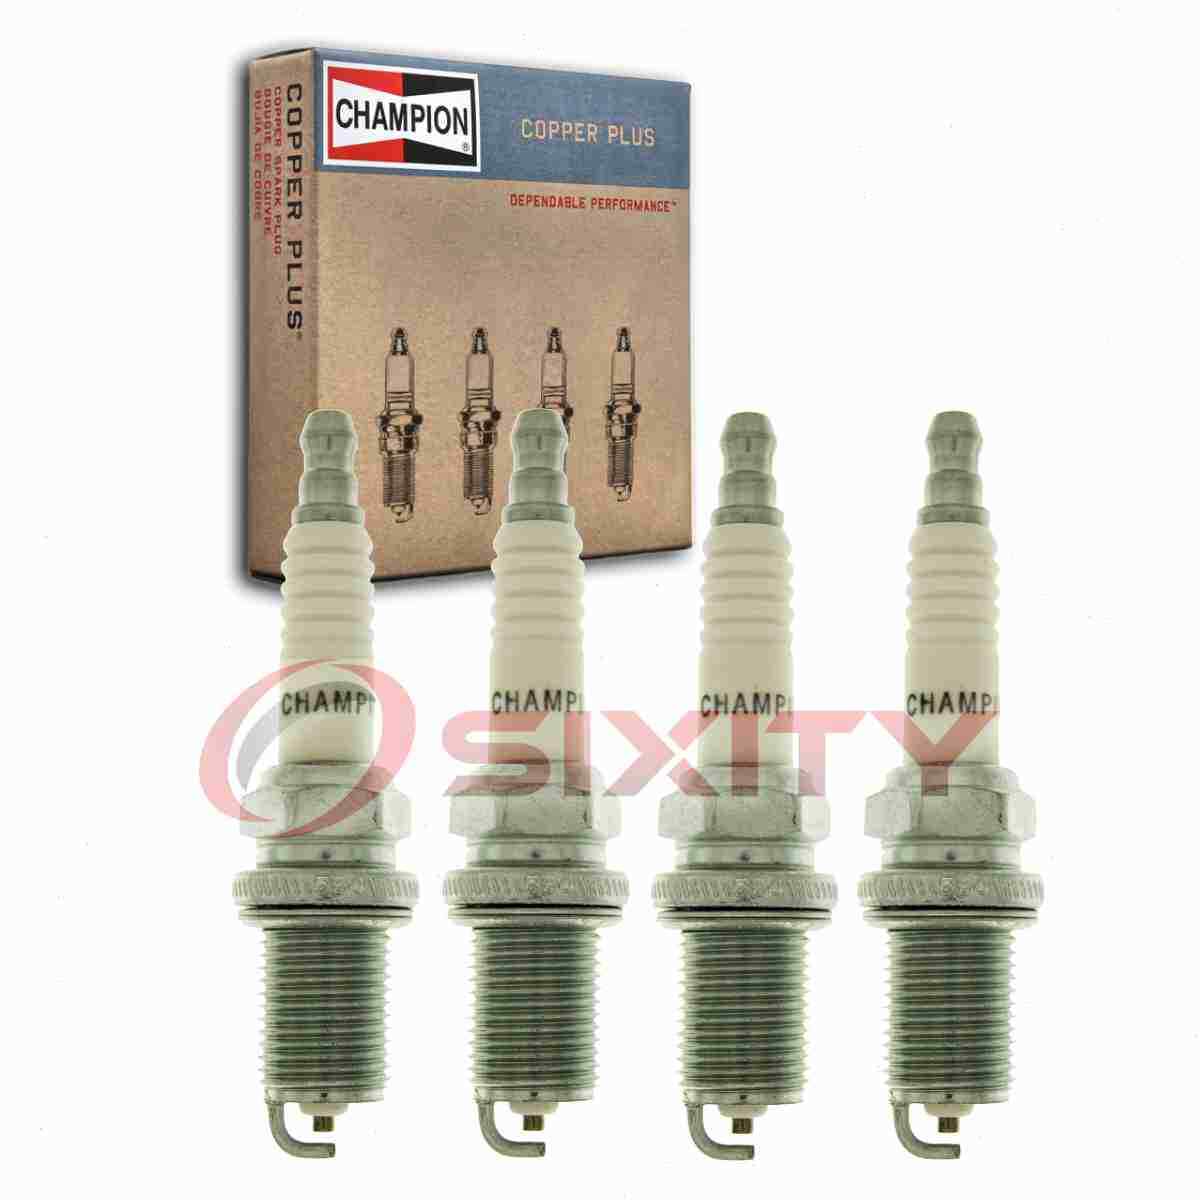 4 pc Champion Exhaust Side Copper Plus Spark Plugs for 1984-1989 Nissan wc